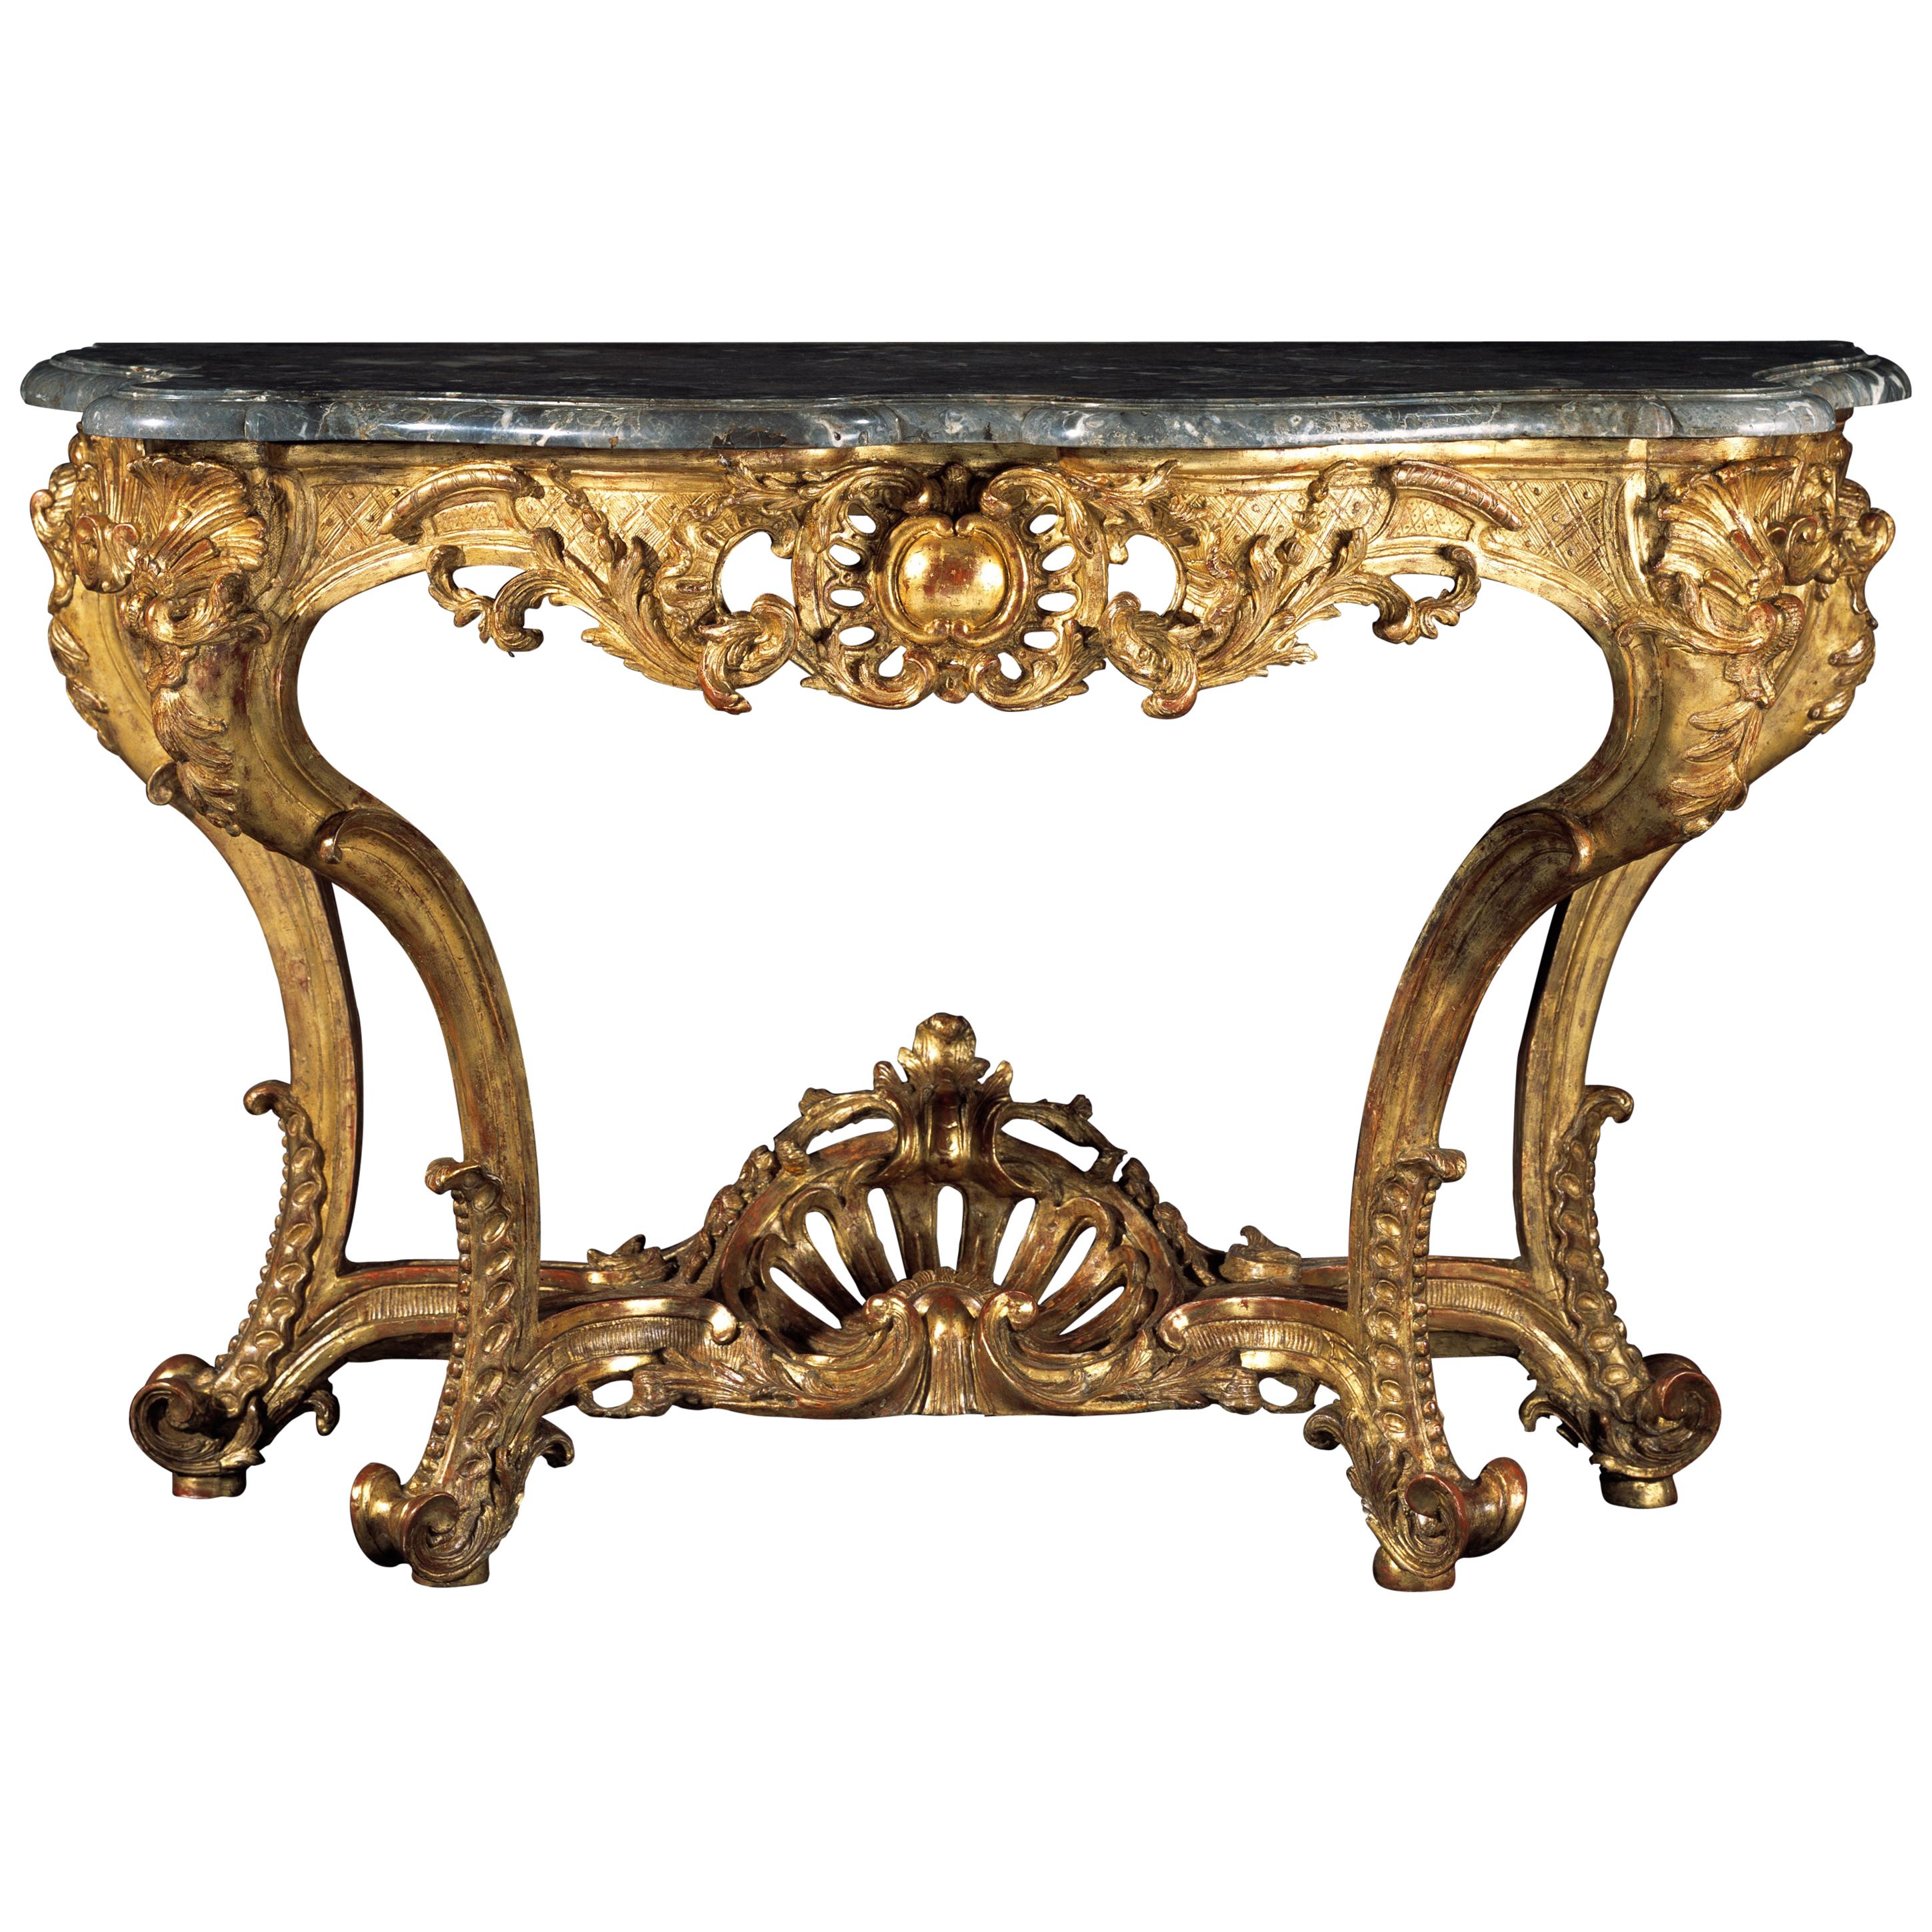 Large Early 18th Century Regence Console Table